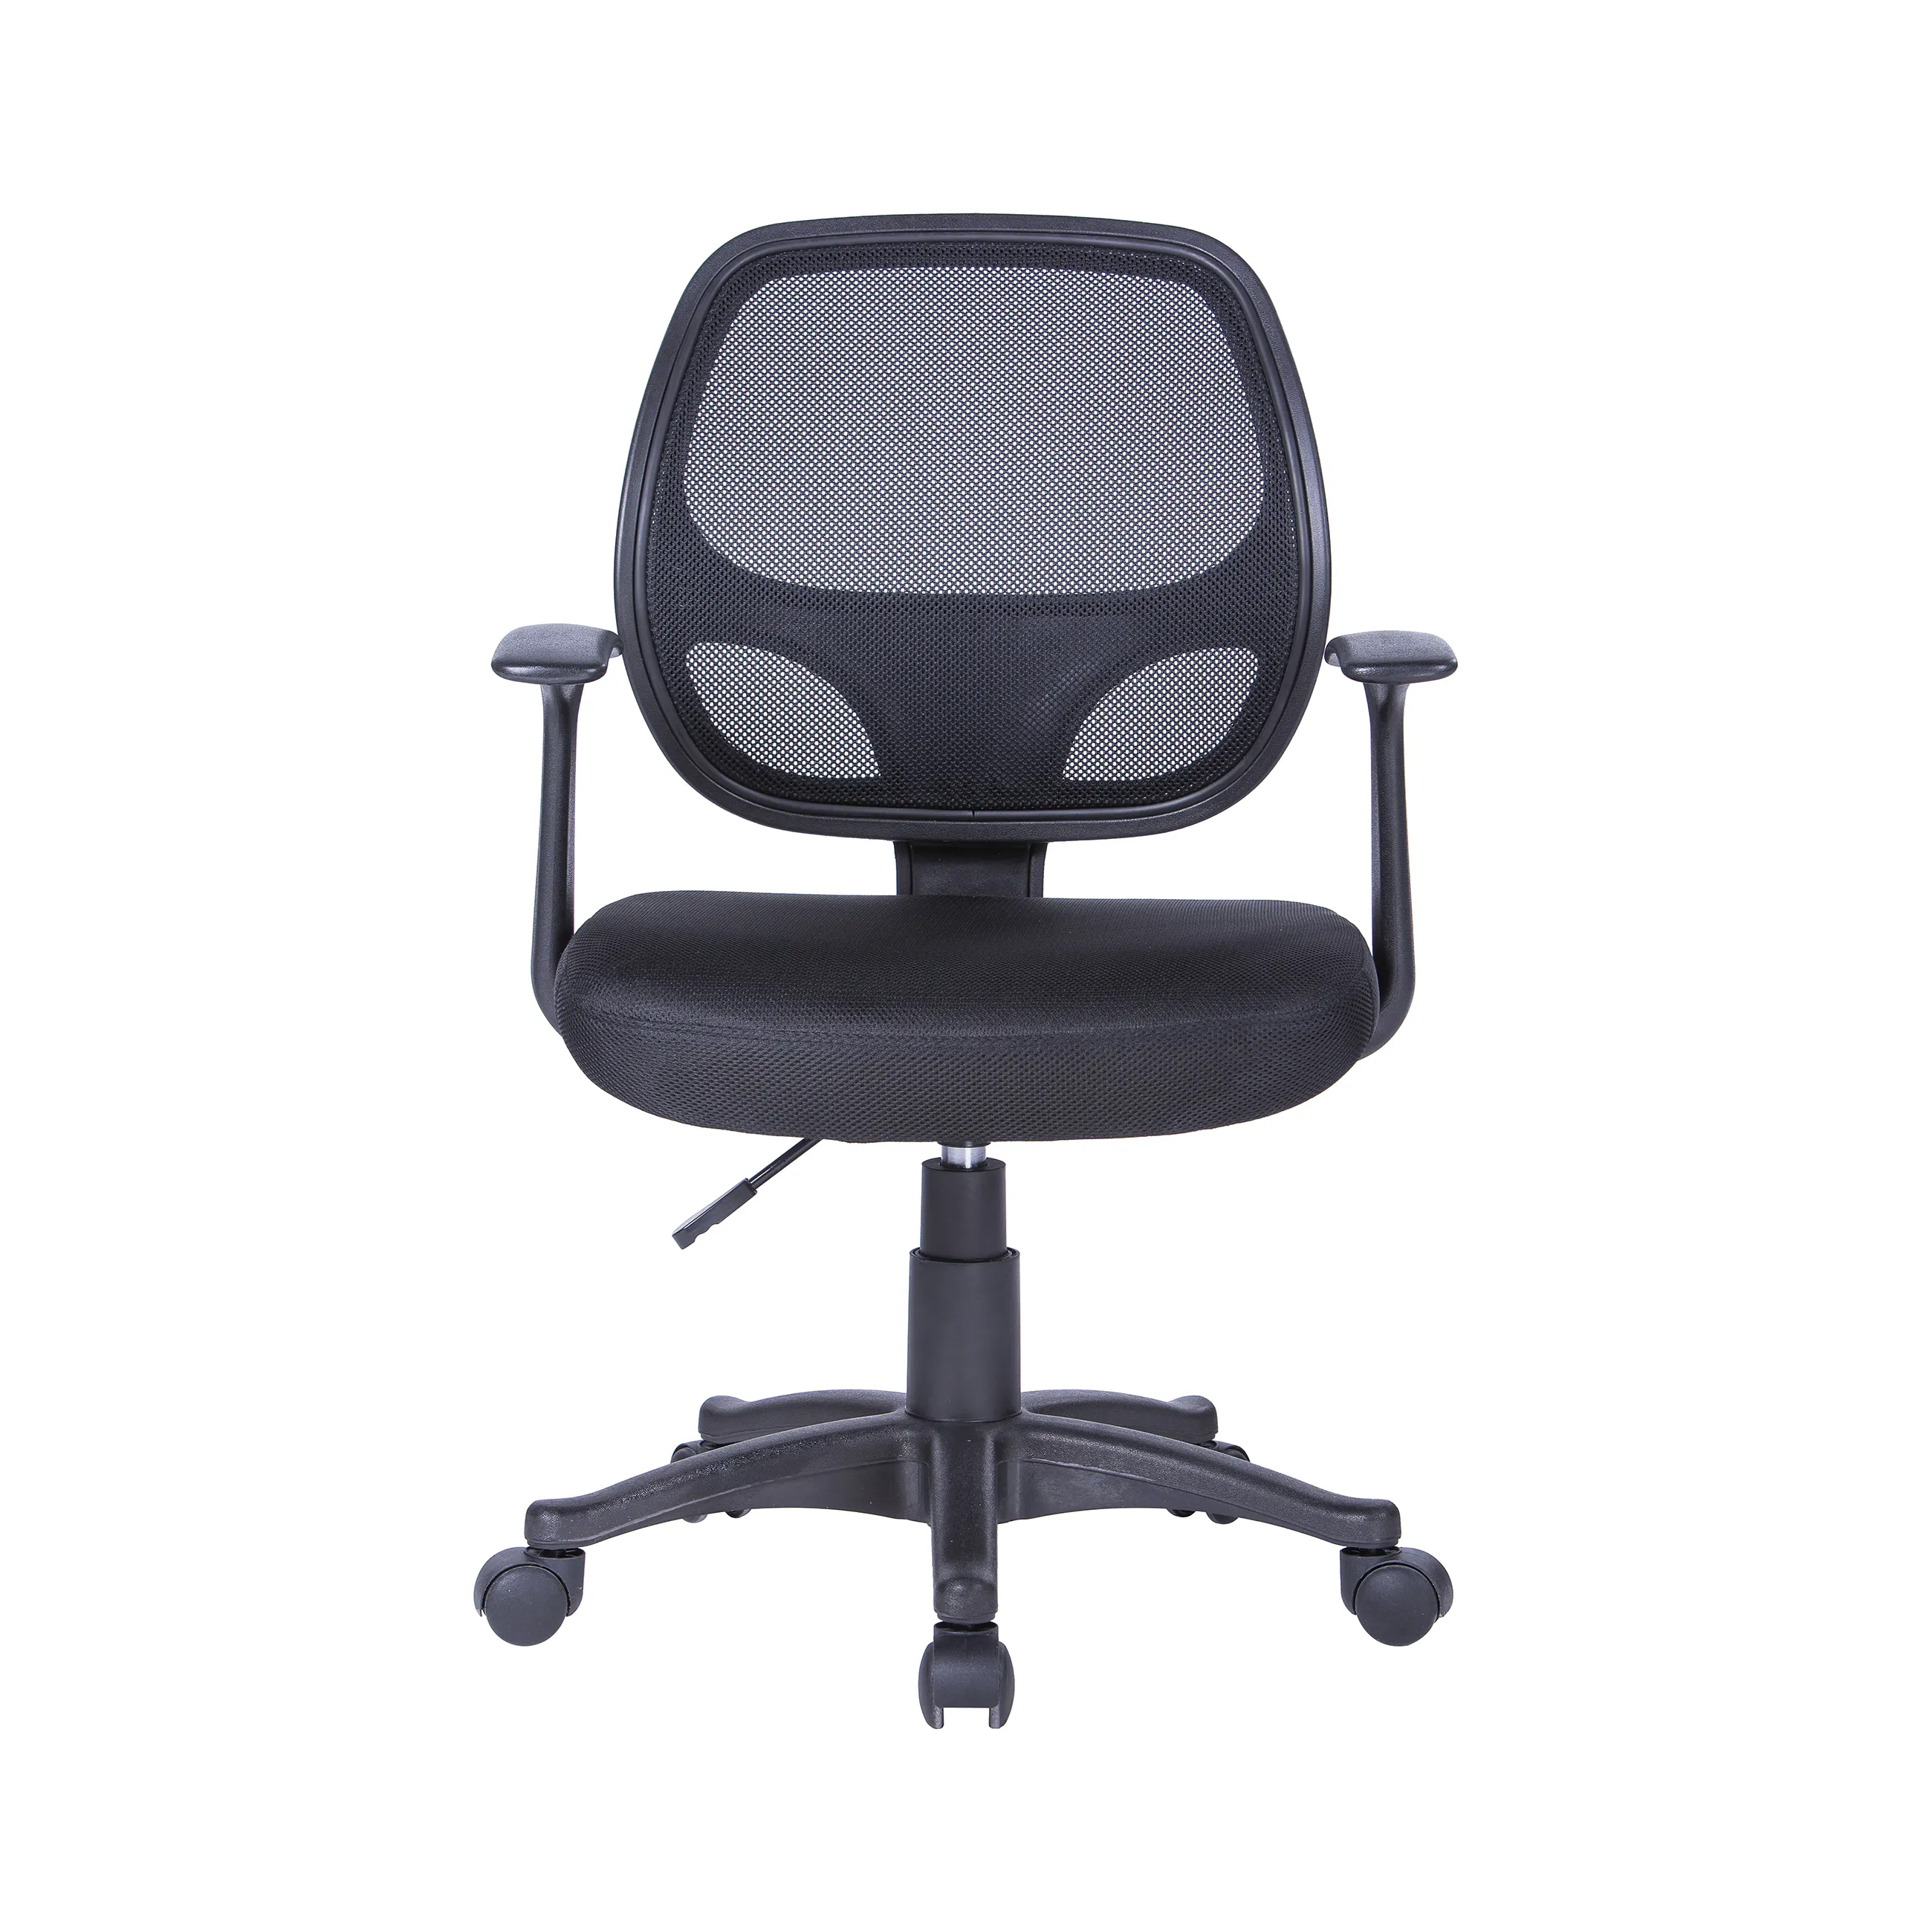 Executive factory swivel office chair black color height adjustable chair office